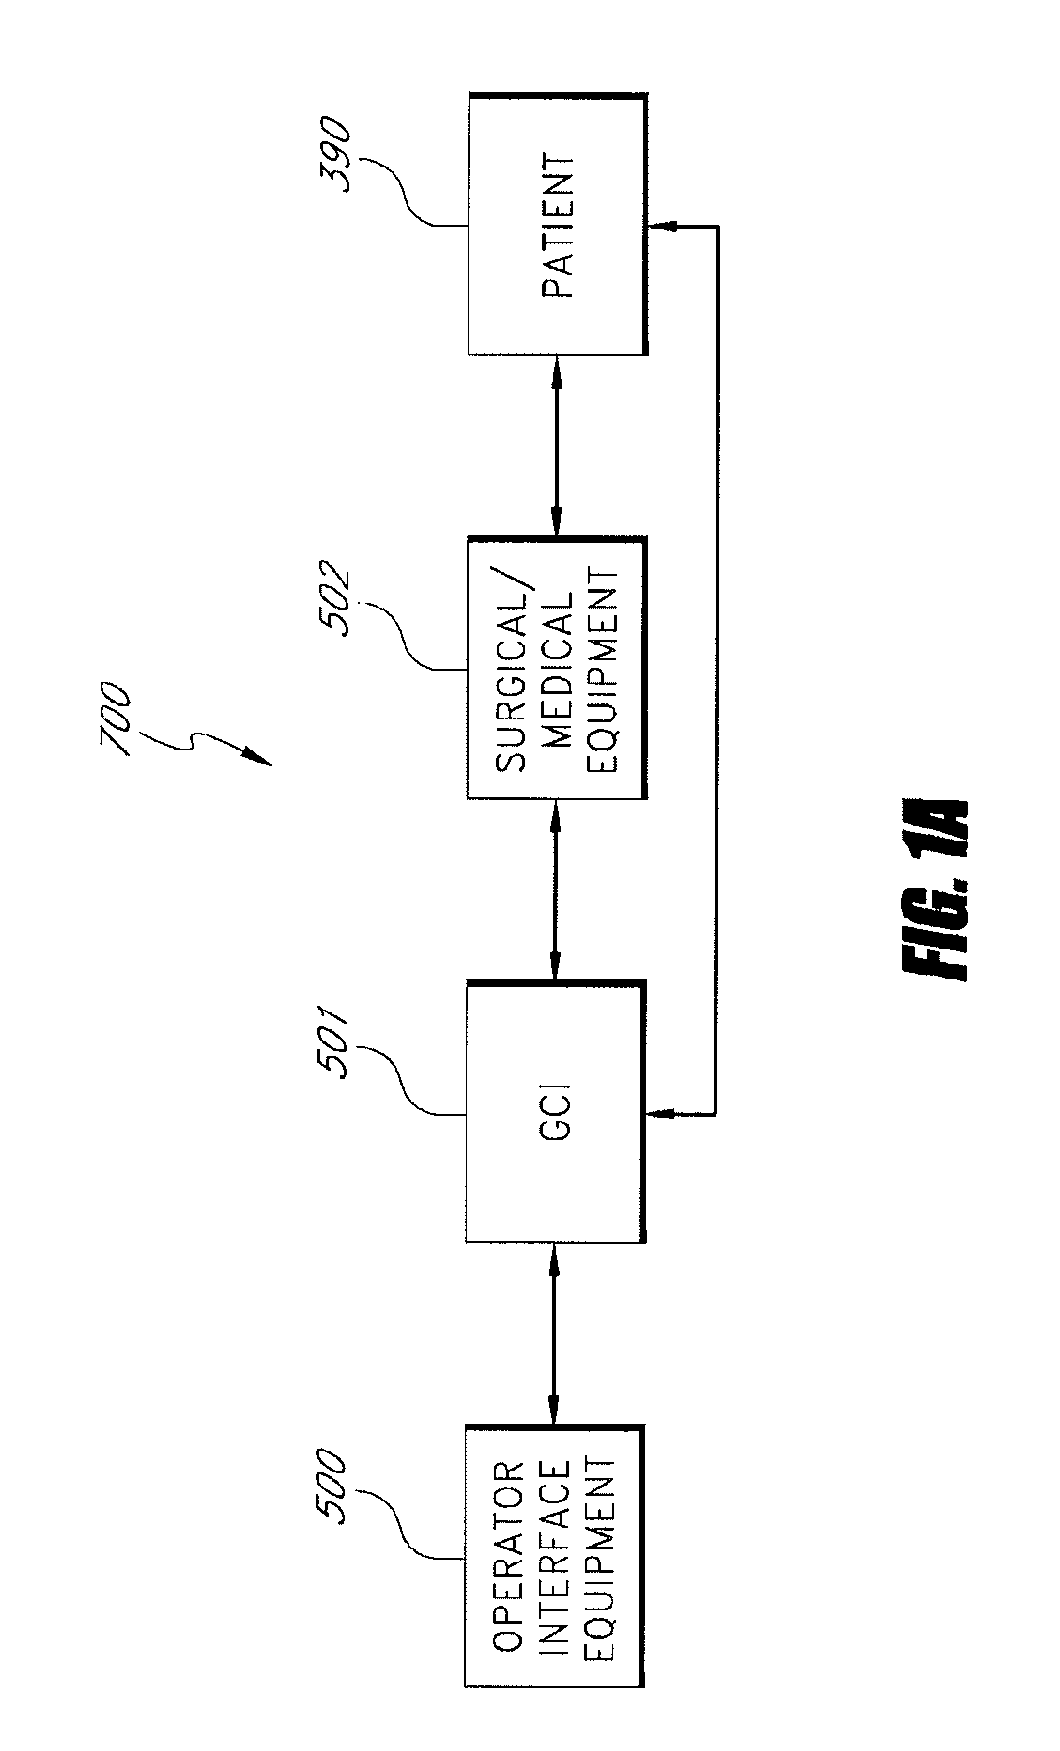 Apparatus and method for catheter guidance control and imaging